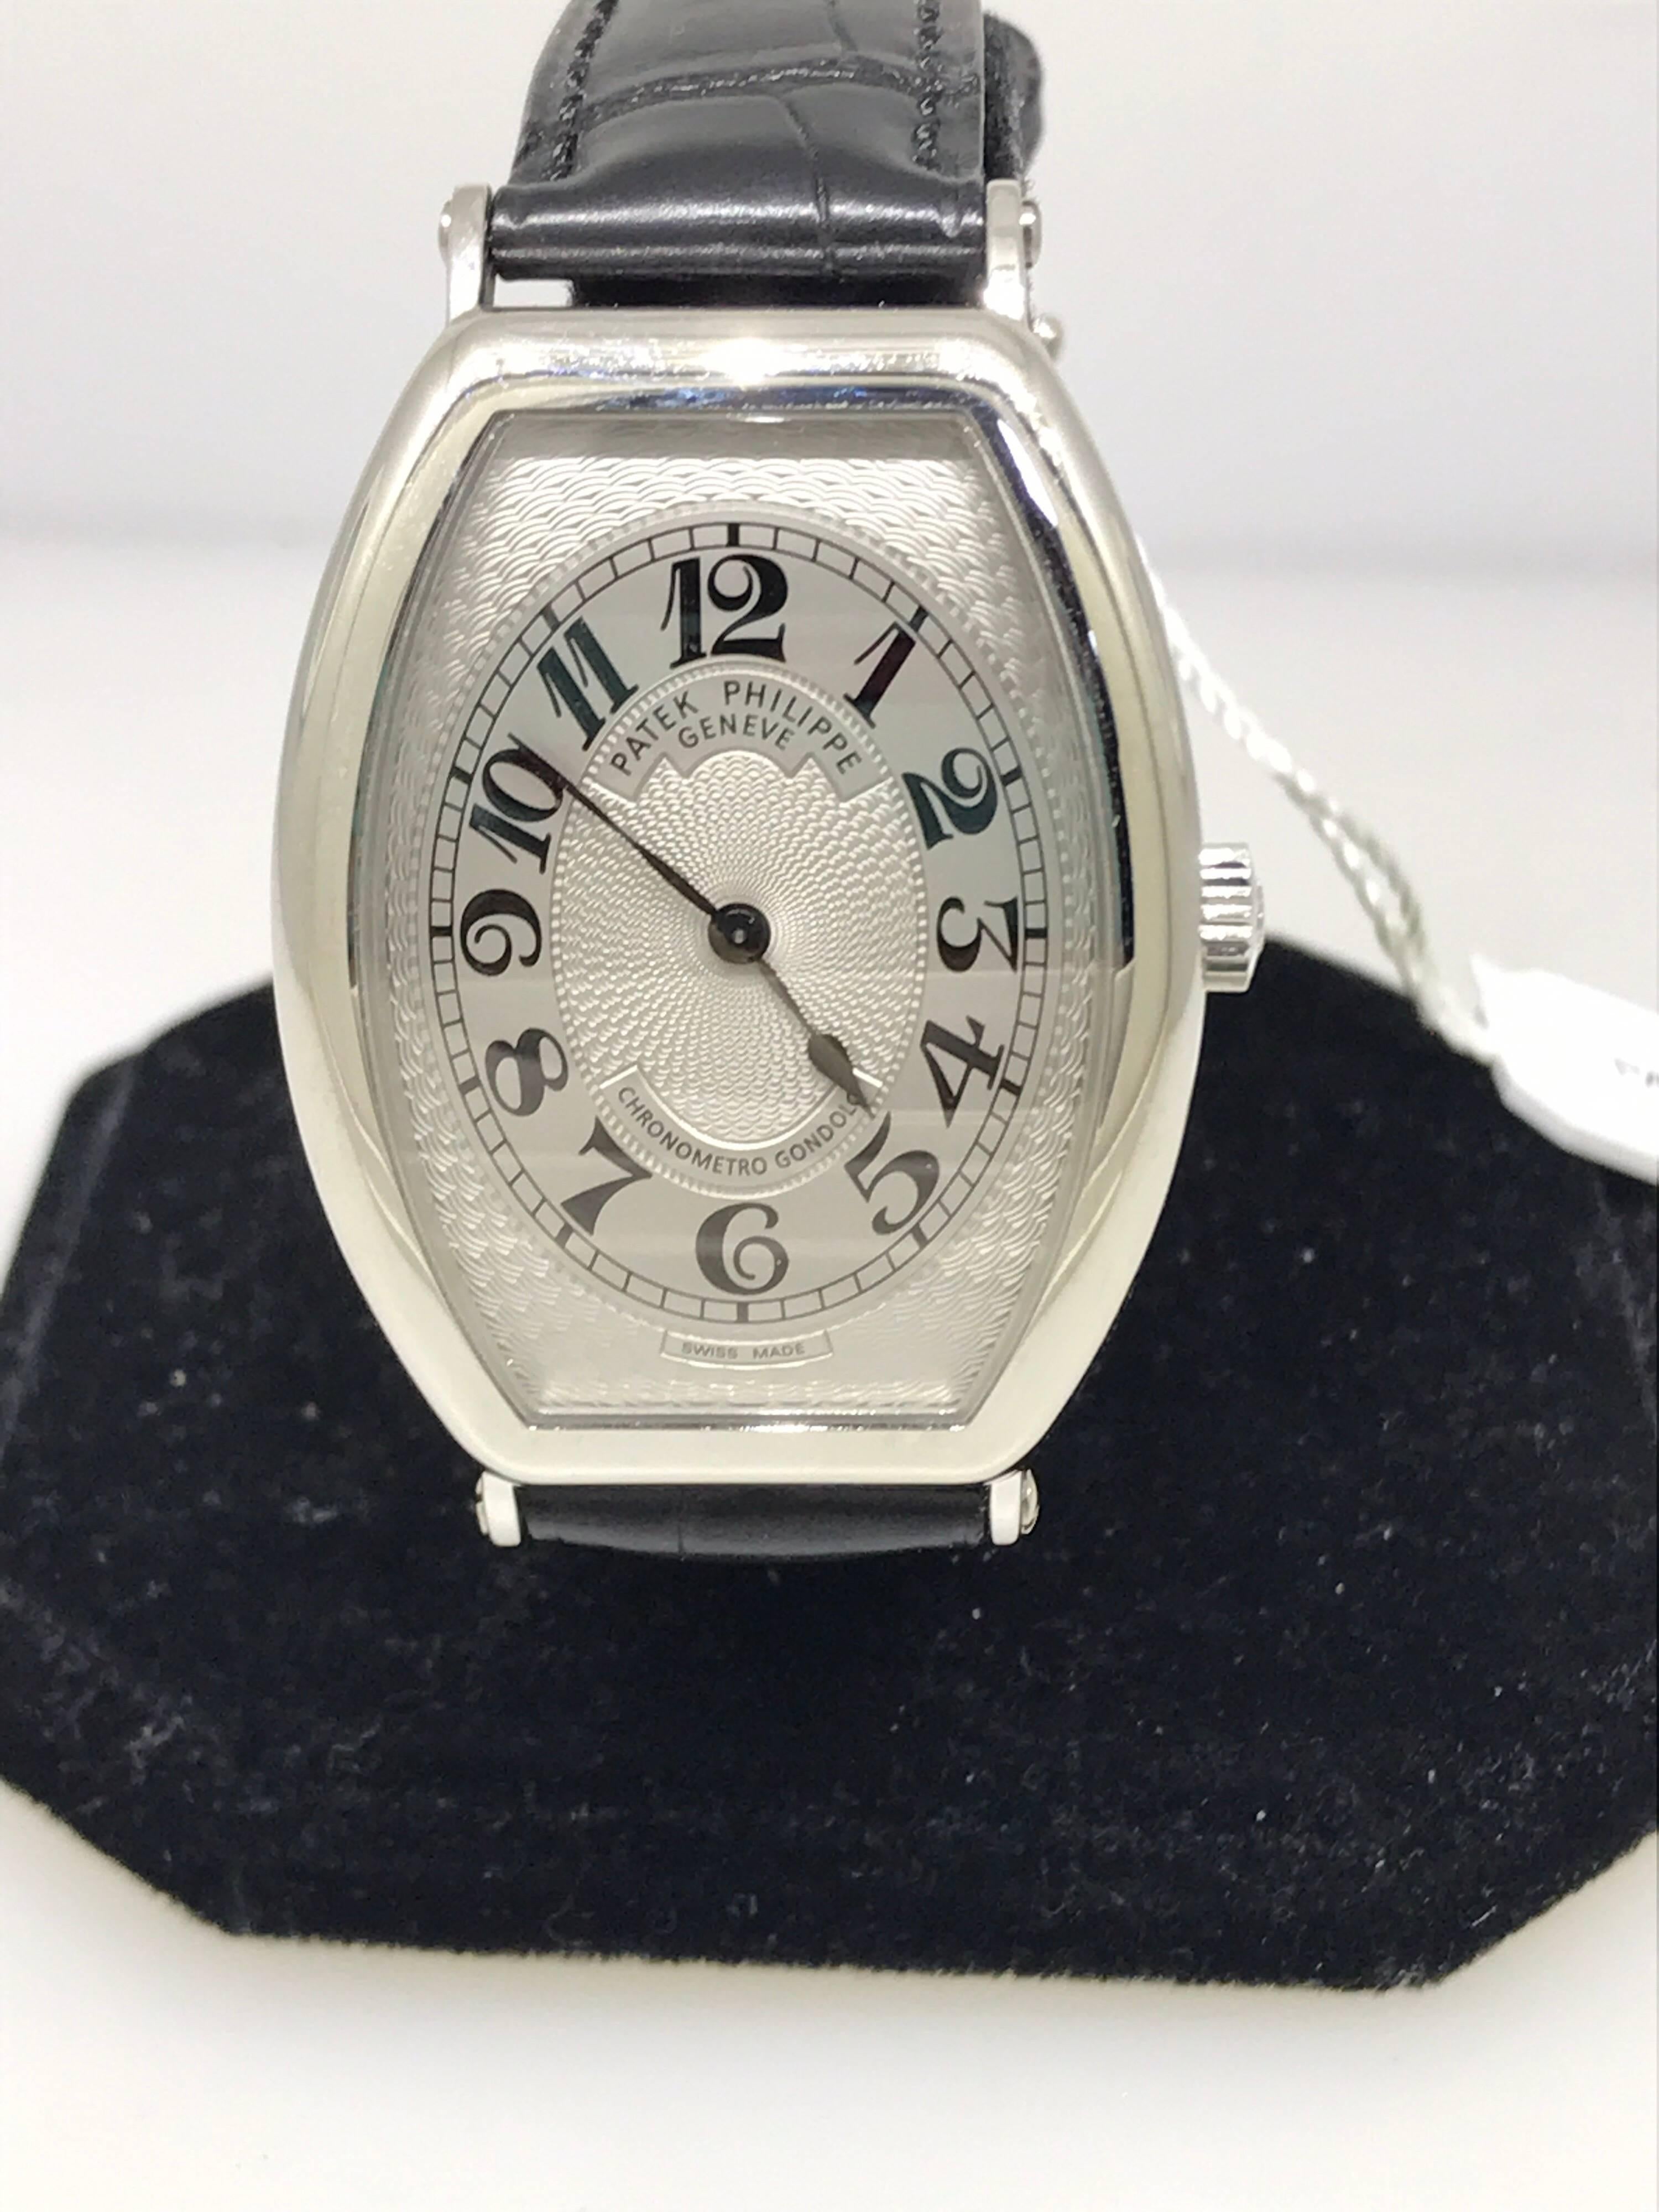 Patek Phillipe Gondolo Men's Watch

Model Number: 5098P-001

100% Authentic

Brand New

Comes with original Patek Phillipe Box, Warranty (Open Papers), and Leather pouch with manual

Platinum Case

Silver Dial
 
Mechanical Self-Winding